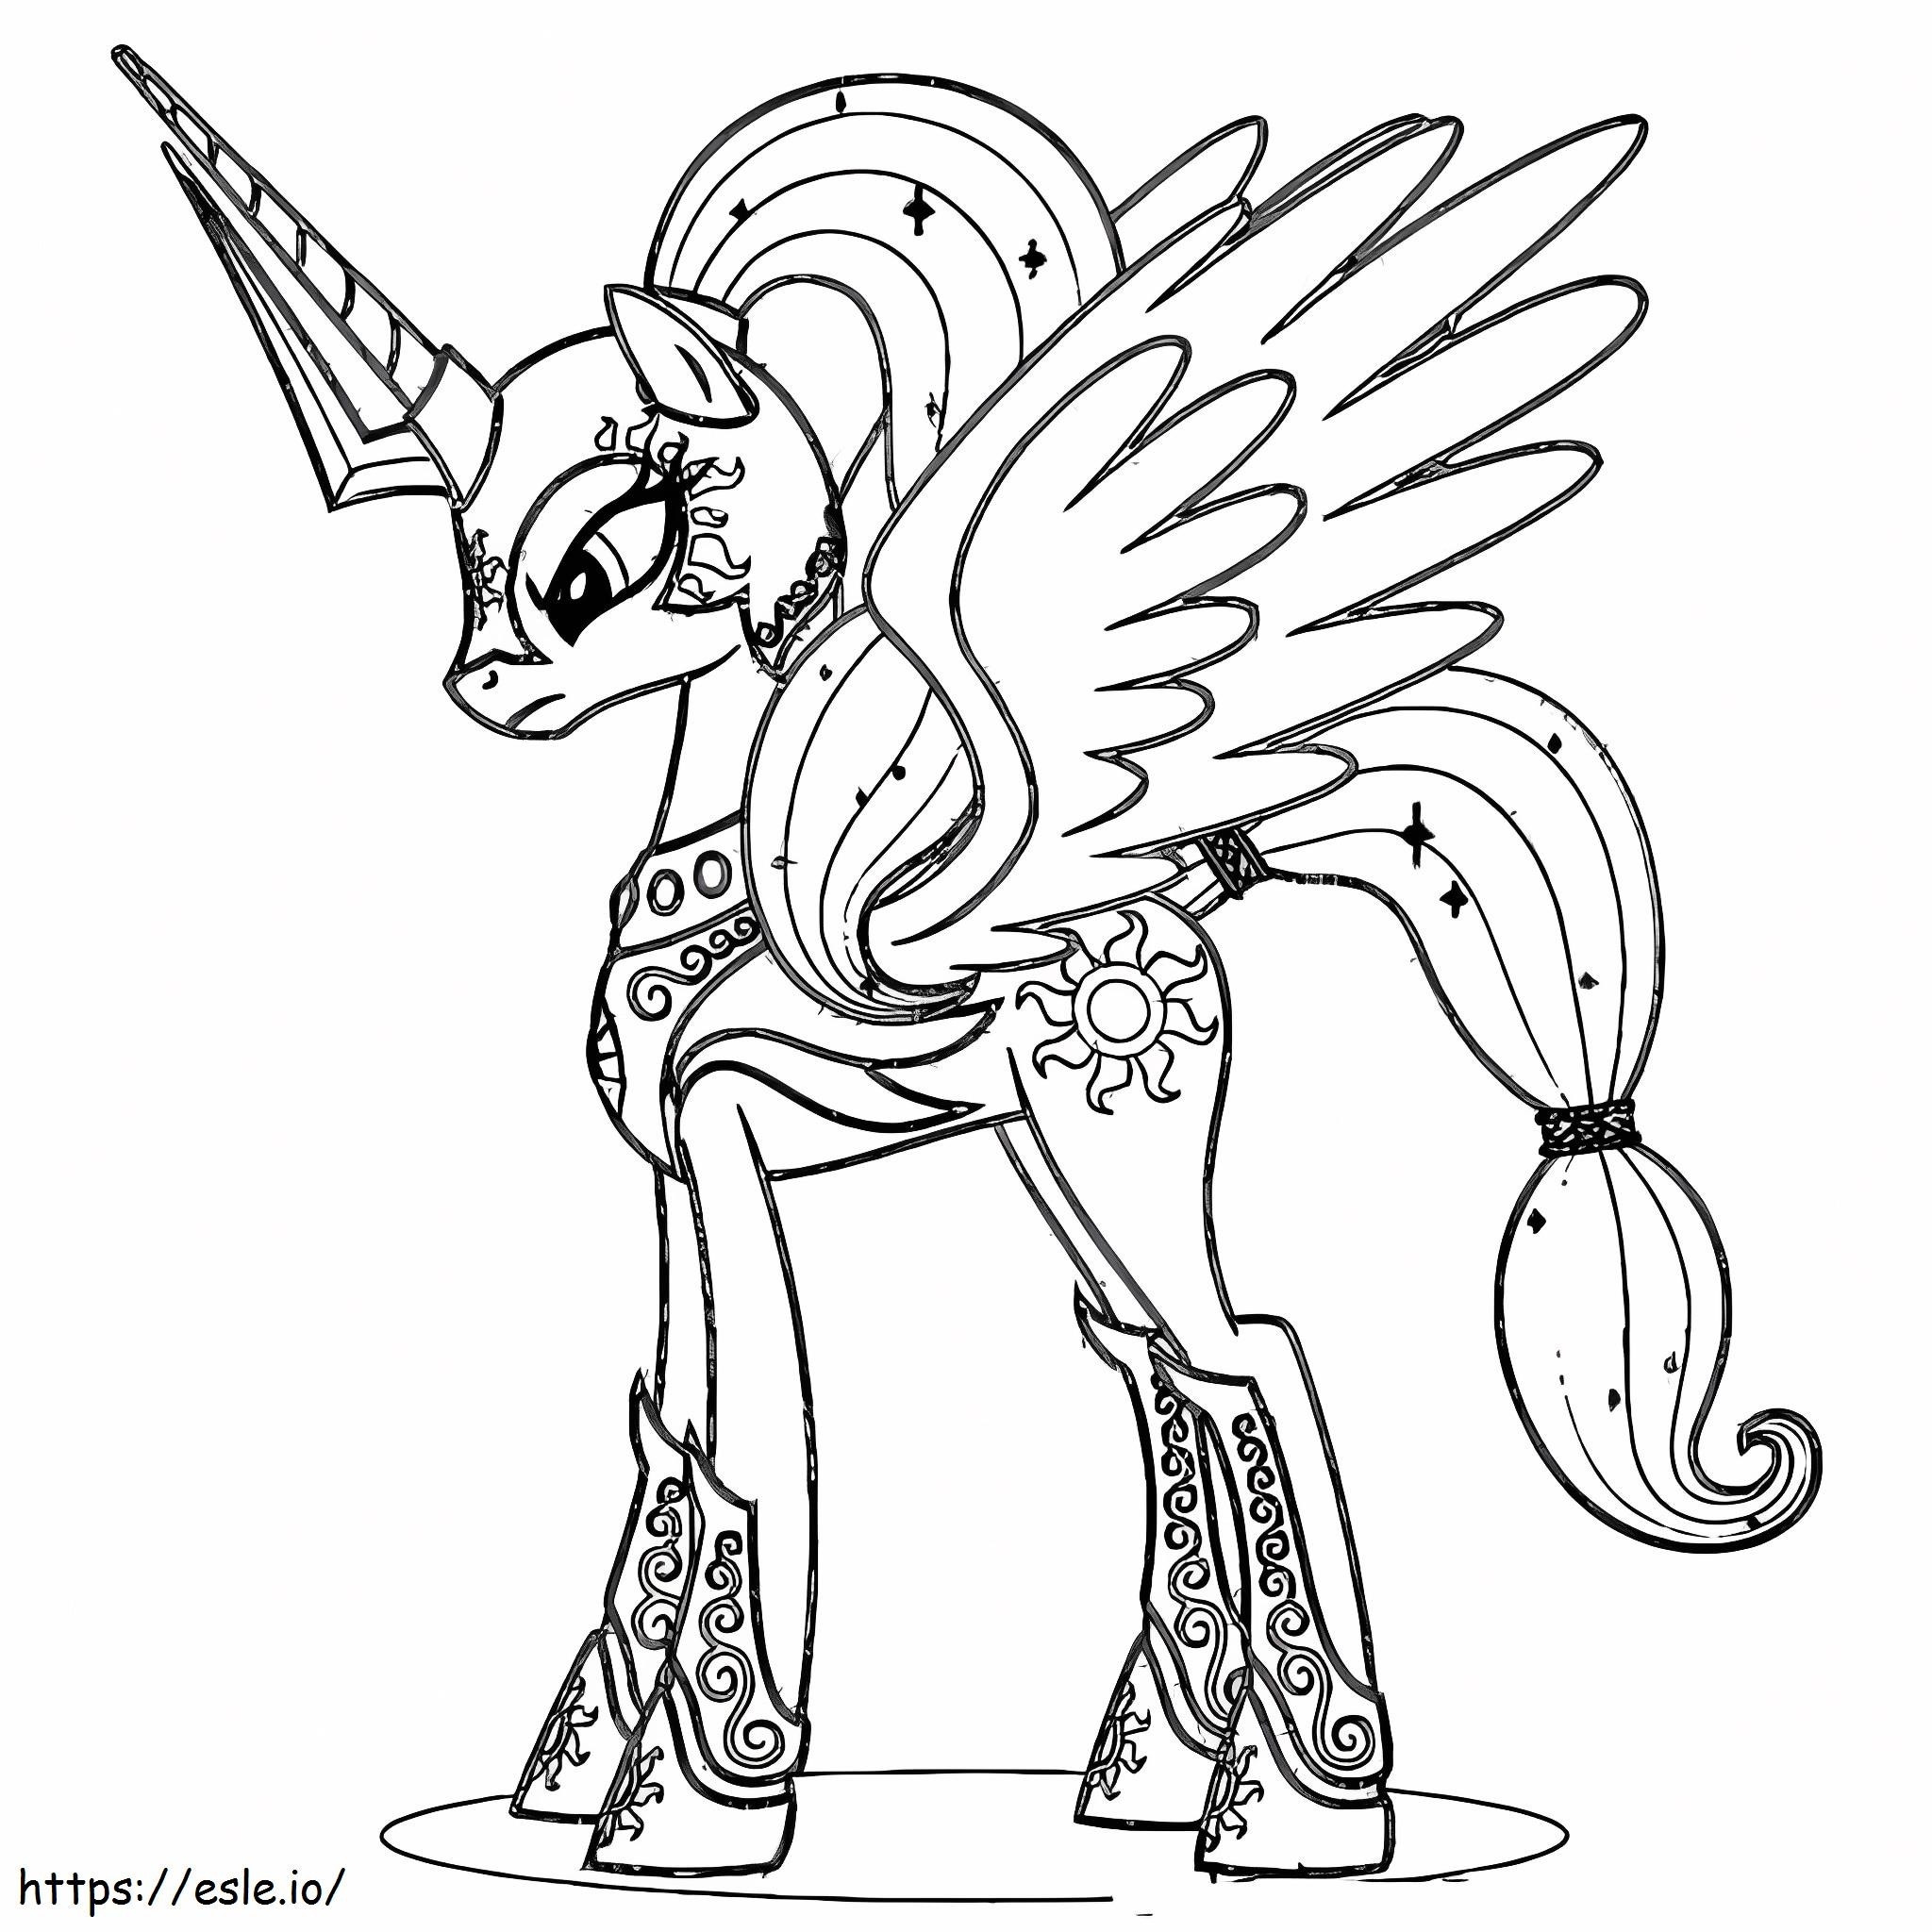 Pony Soldier coloring page